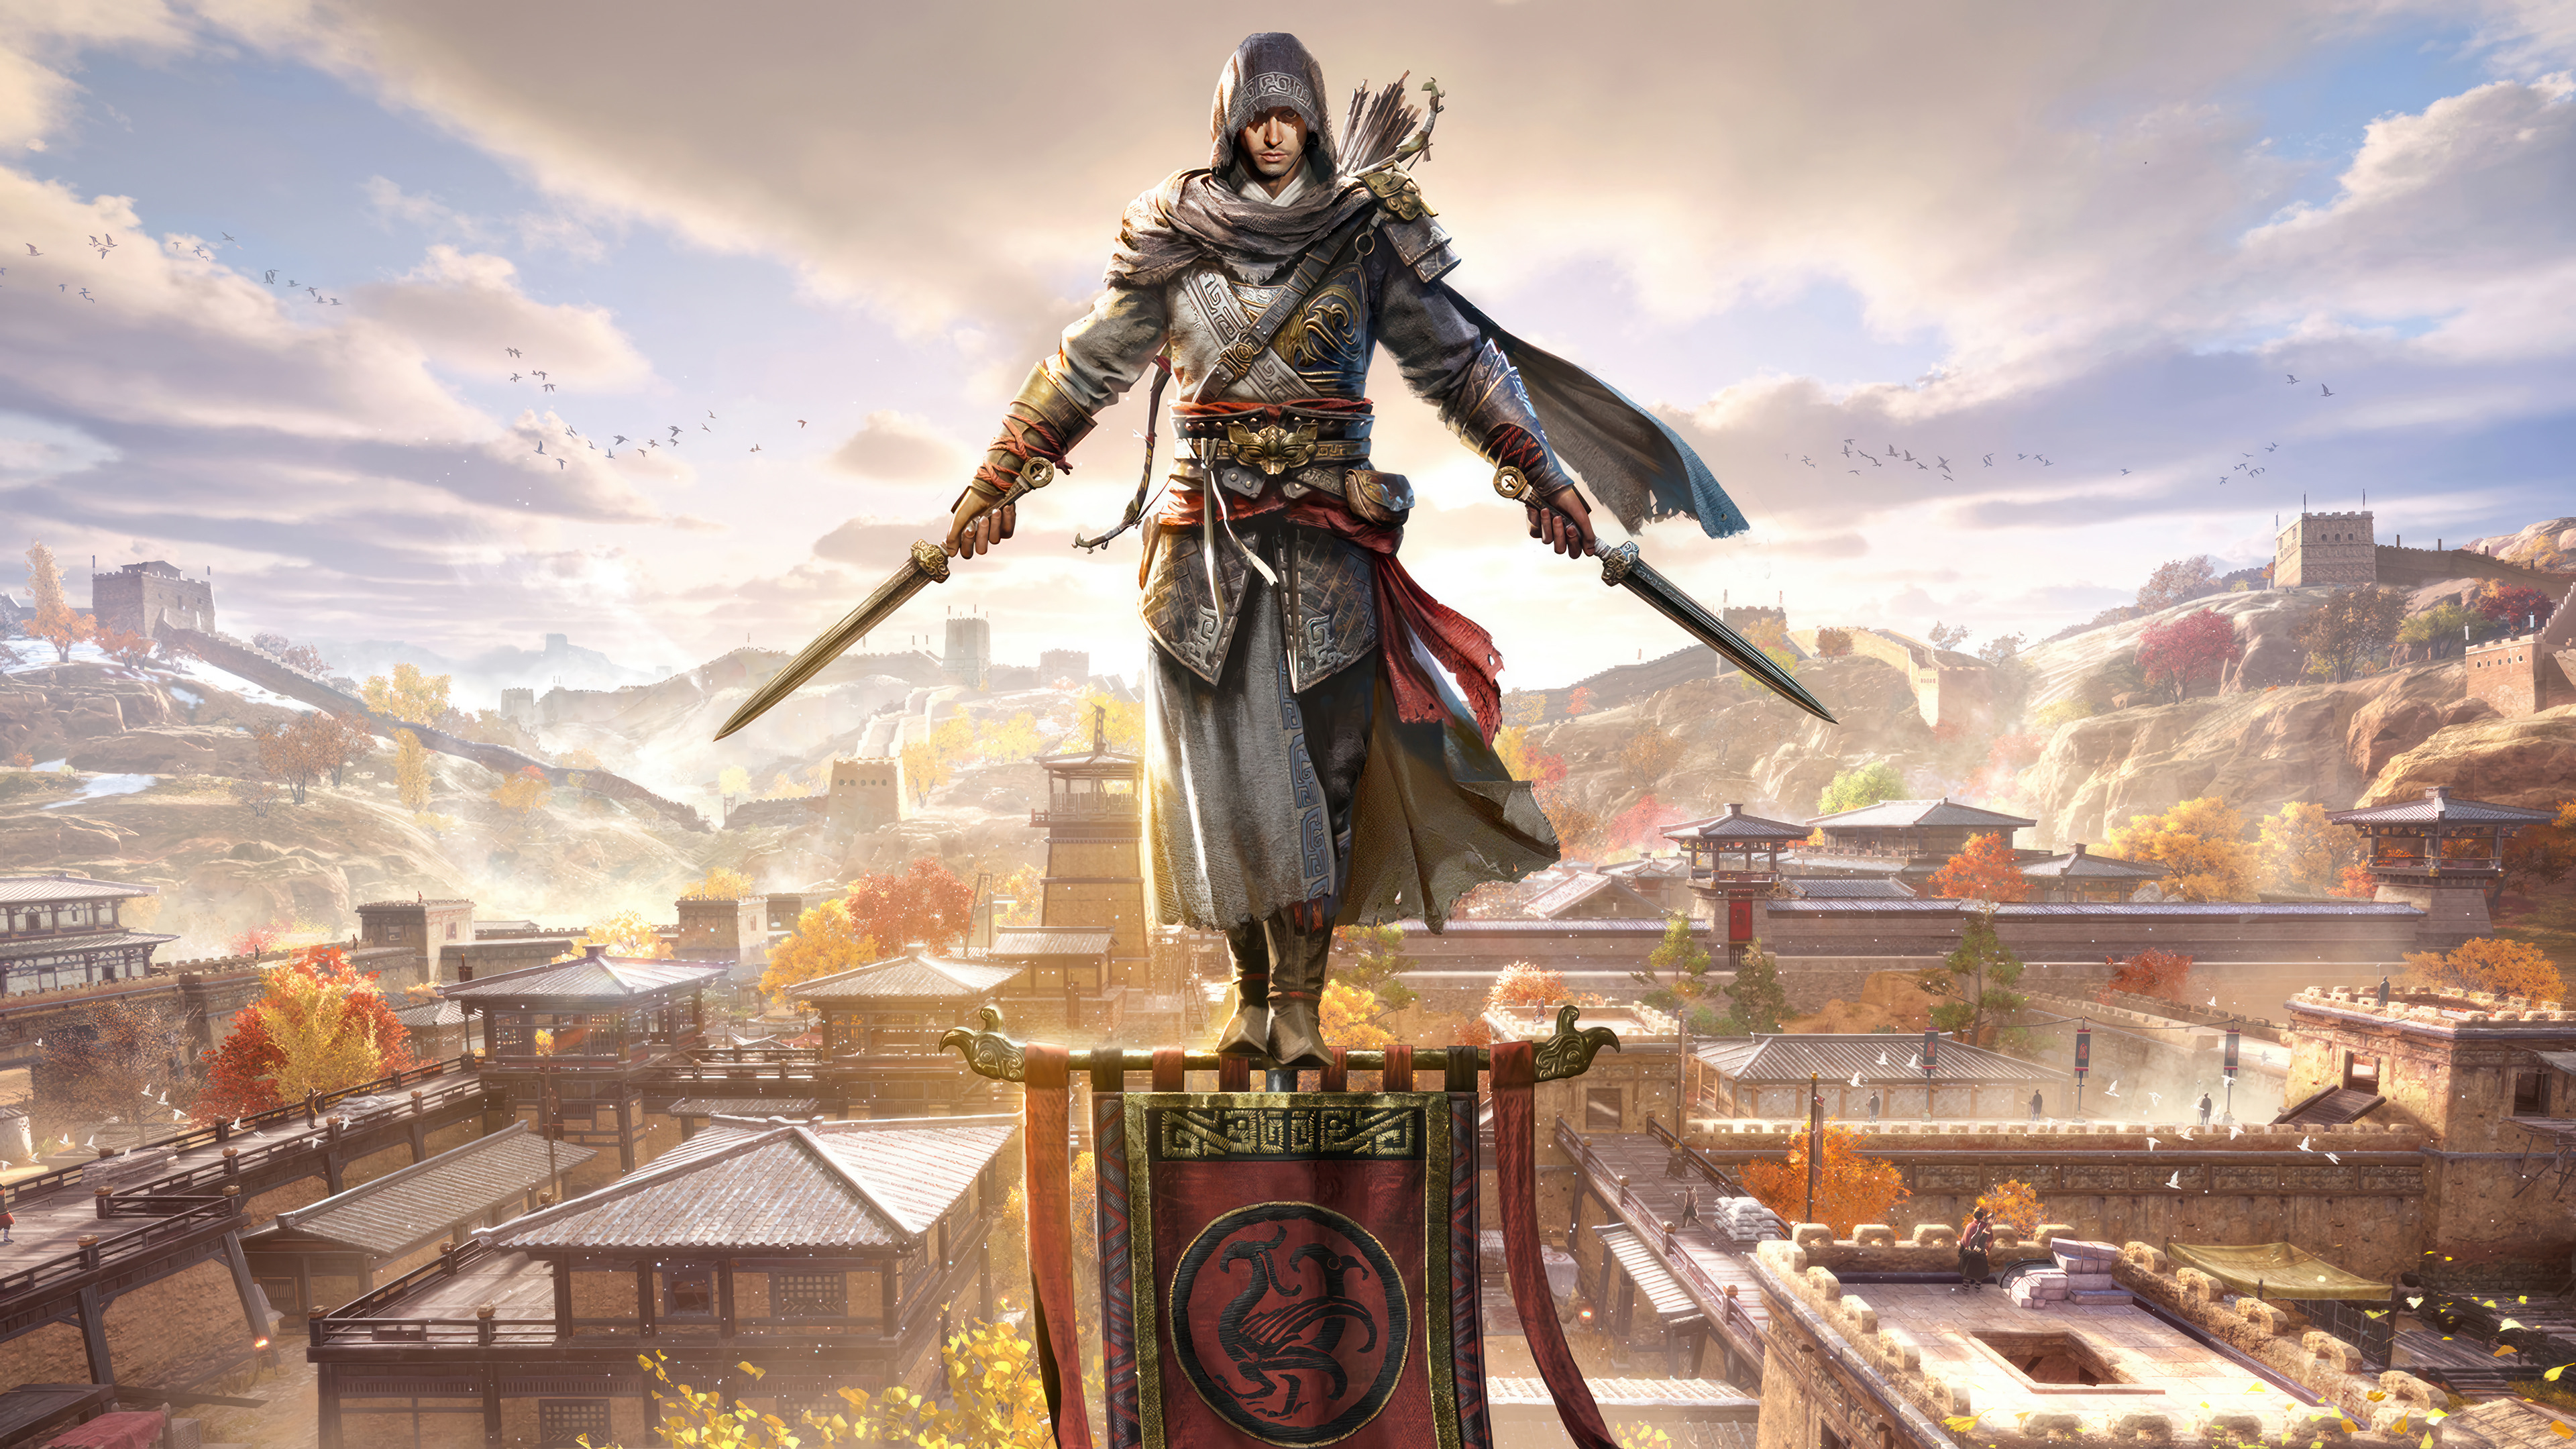 Assassins creed red дата выхода. Ассасин Крид 2022. Assassin’s Creed Mirage. Assassin's Creed Codename Jade. Новый ассасин Крид 2023.